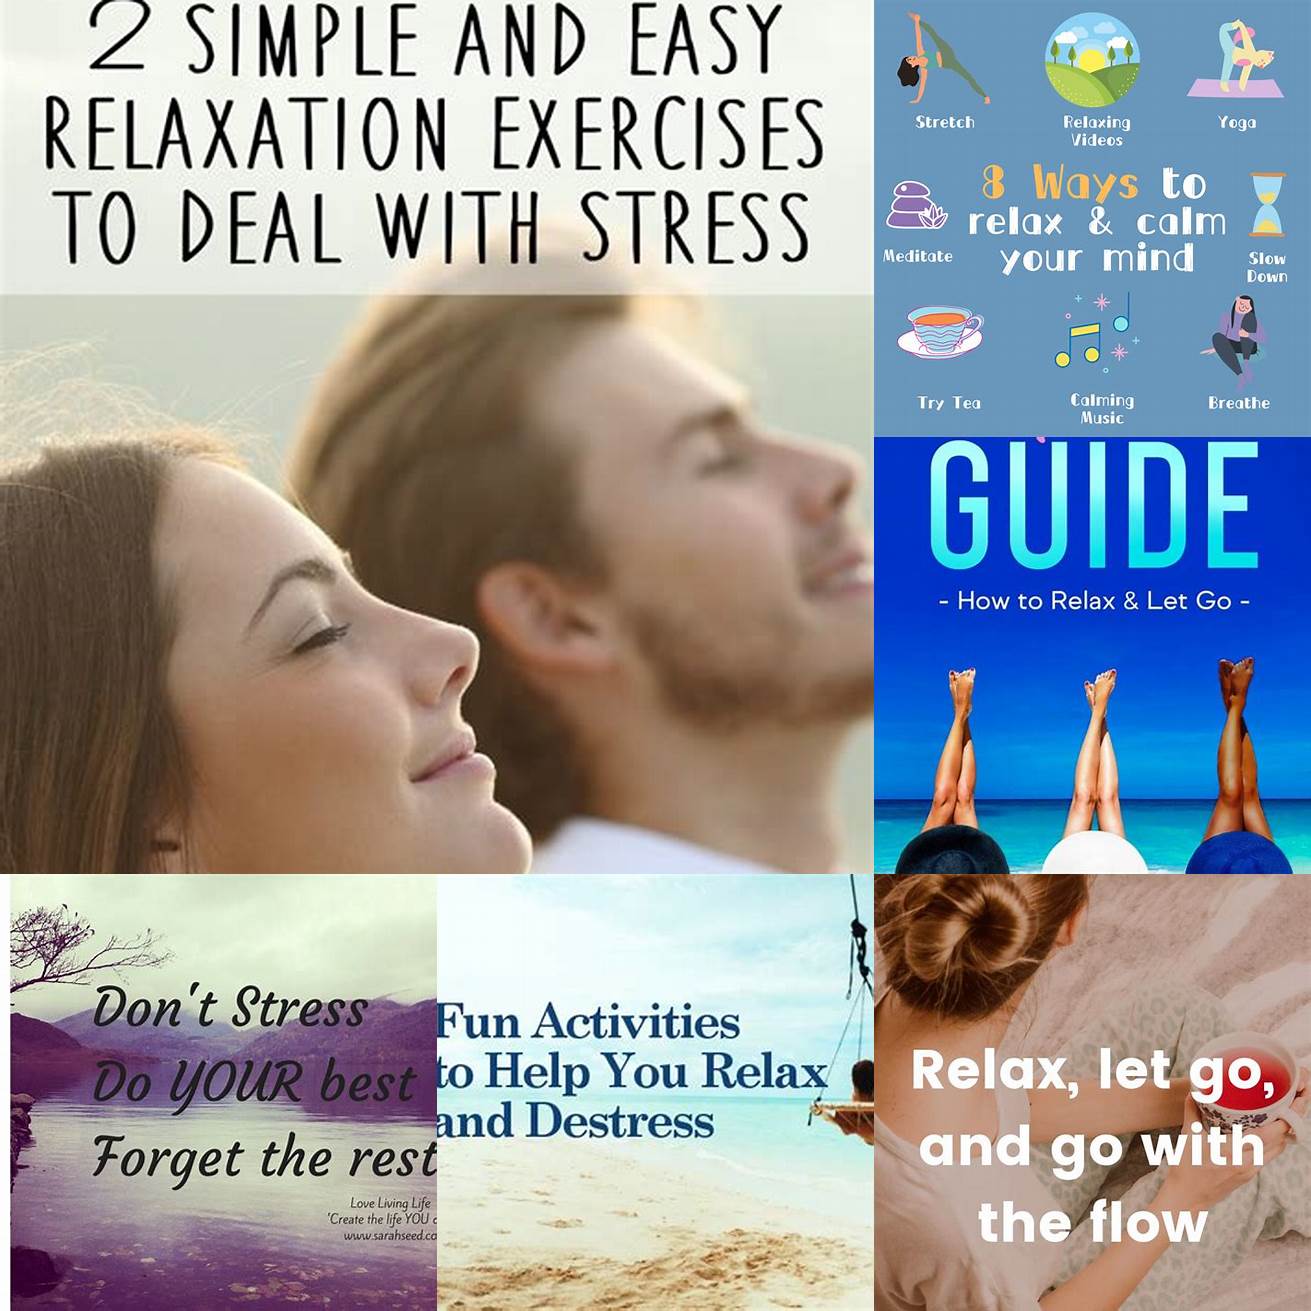 5 Relax Finally try to relax and let go of any stress or worries from your travels